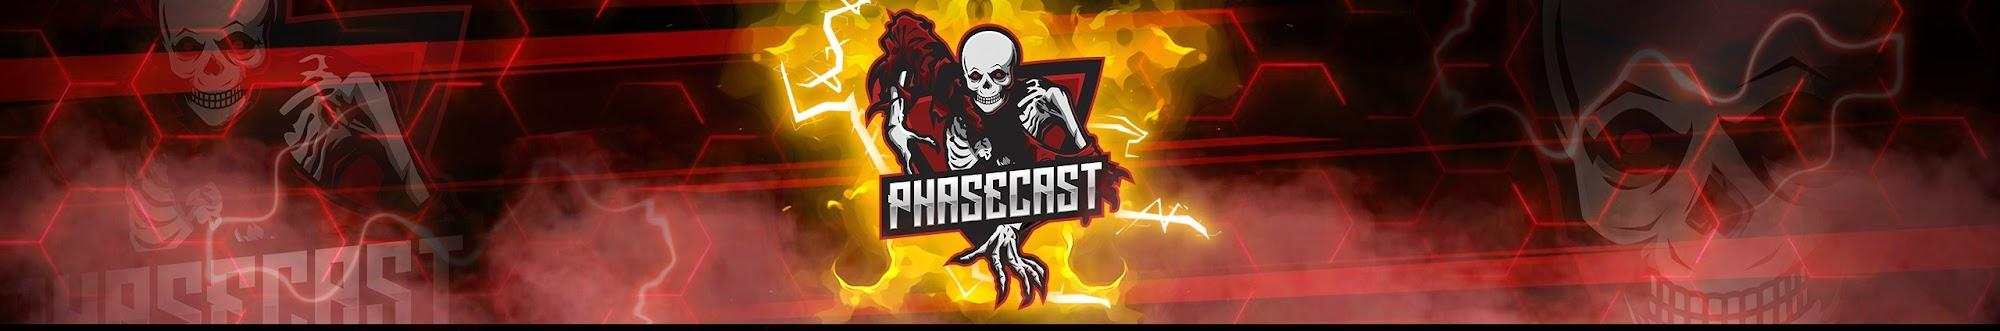 Phasecast